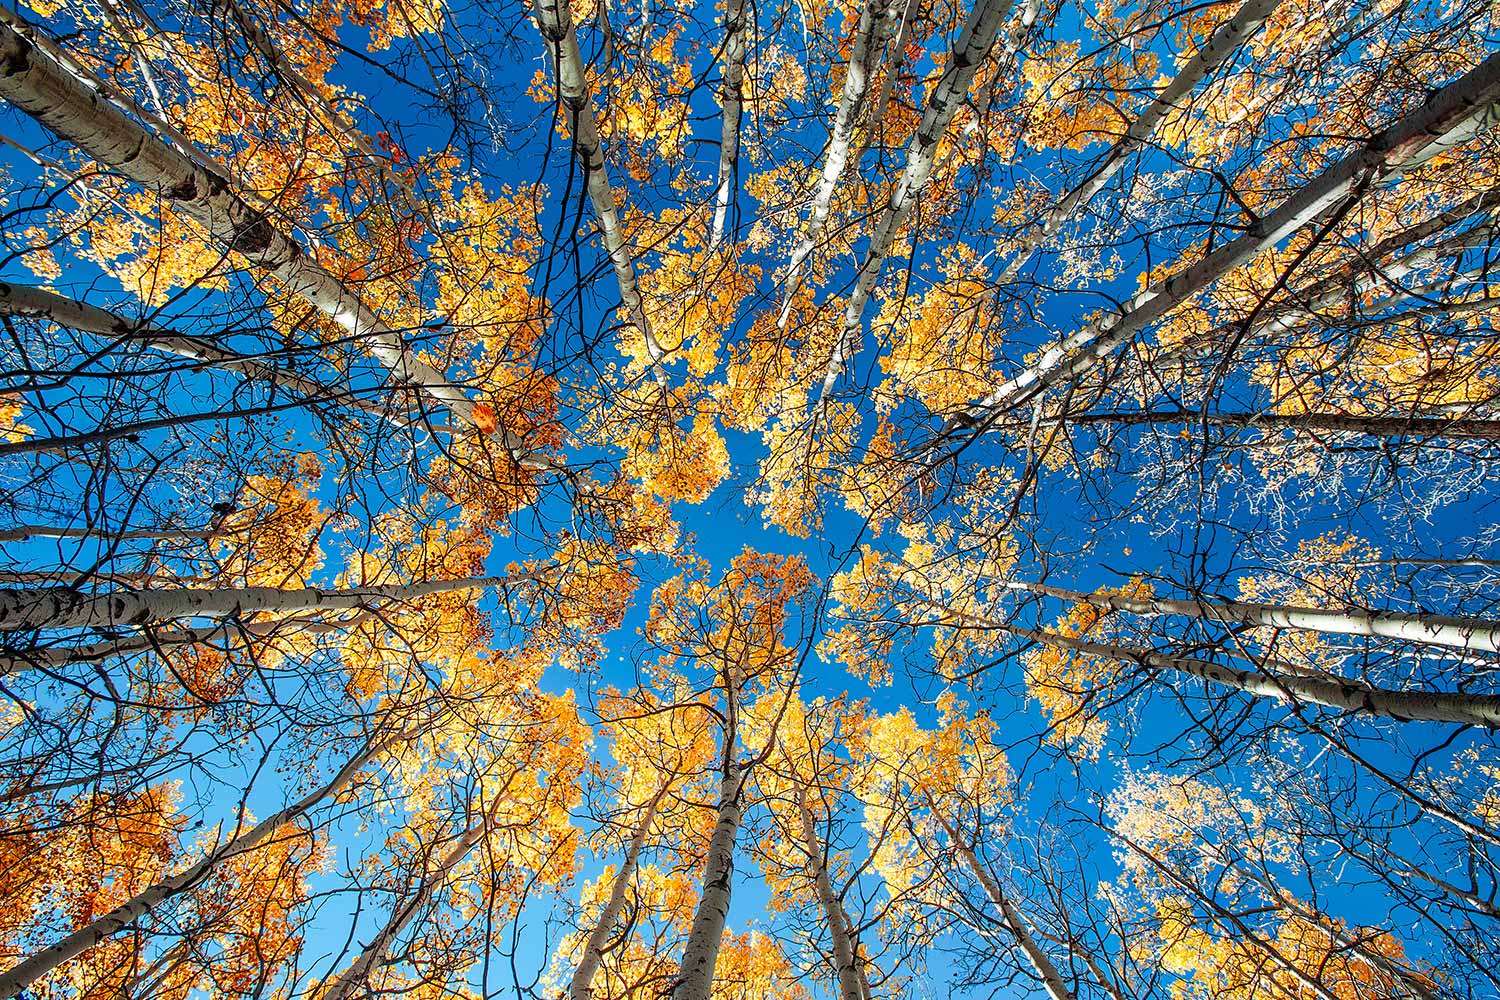 Looking up at a canopy of autumn leaves in a grove of aspen trees near Babb, Montana.&nbsp;→ Buy a Print